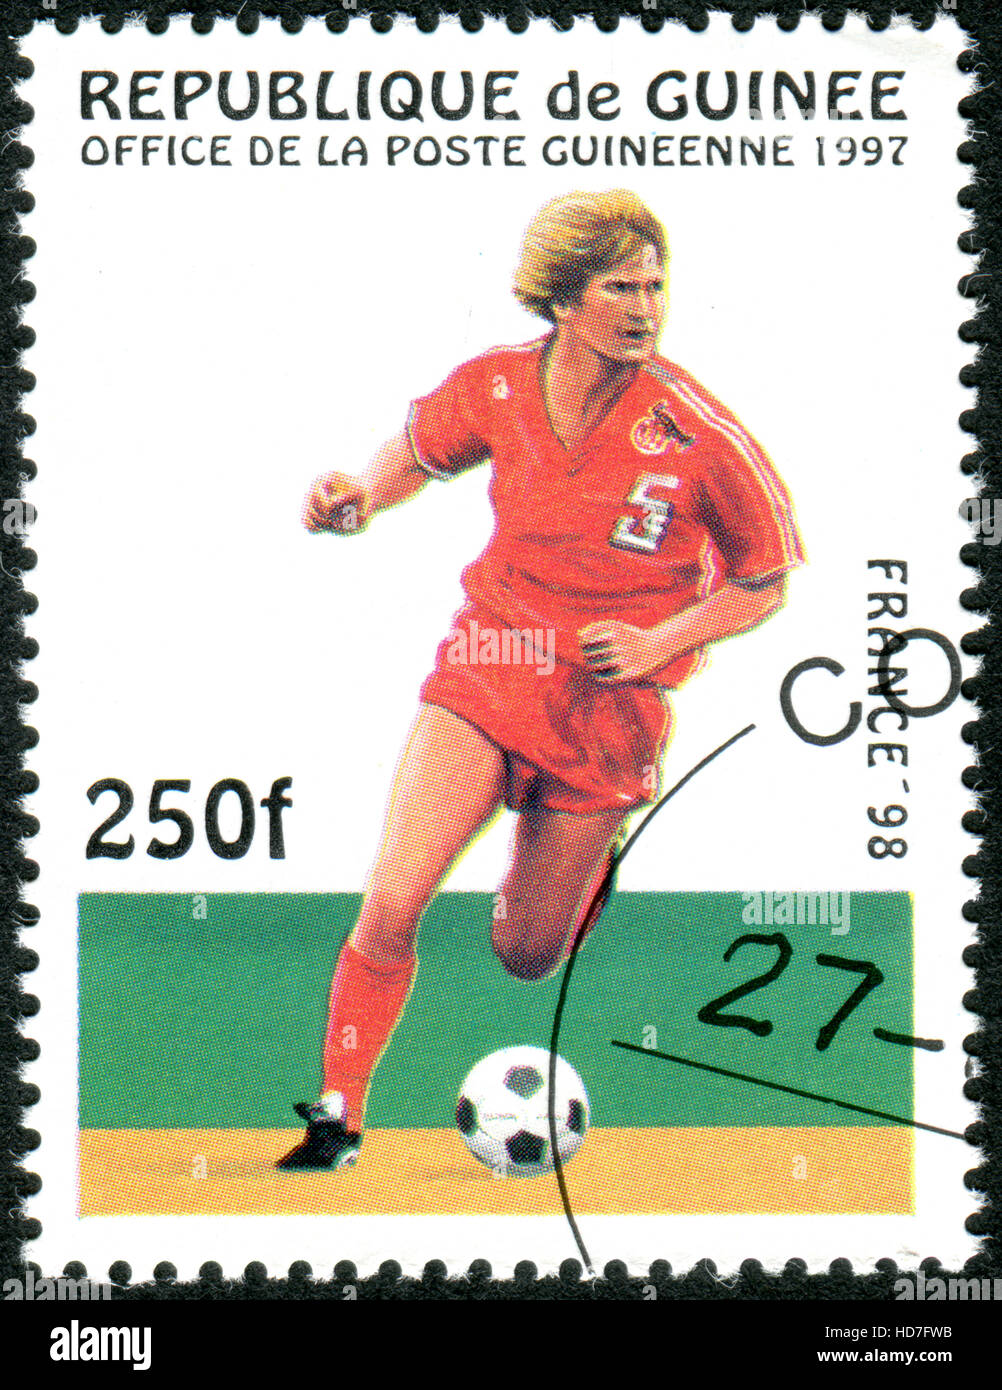 GUINEA - CIRCA 1997: A stamp printed in Guinea dedicated to the FIFA World Cup 1998 - France, shows the Game scene, circa 1997 Stock Photo